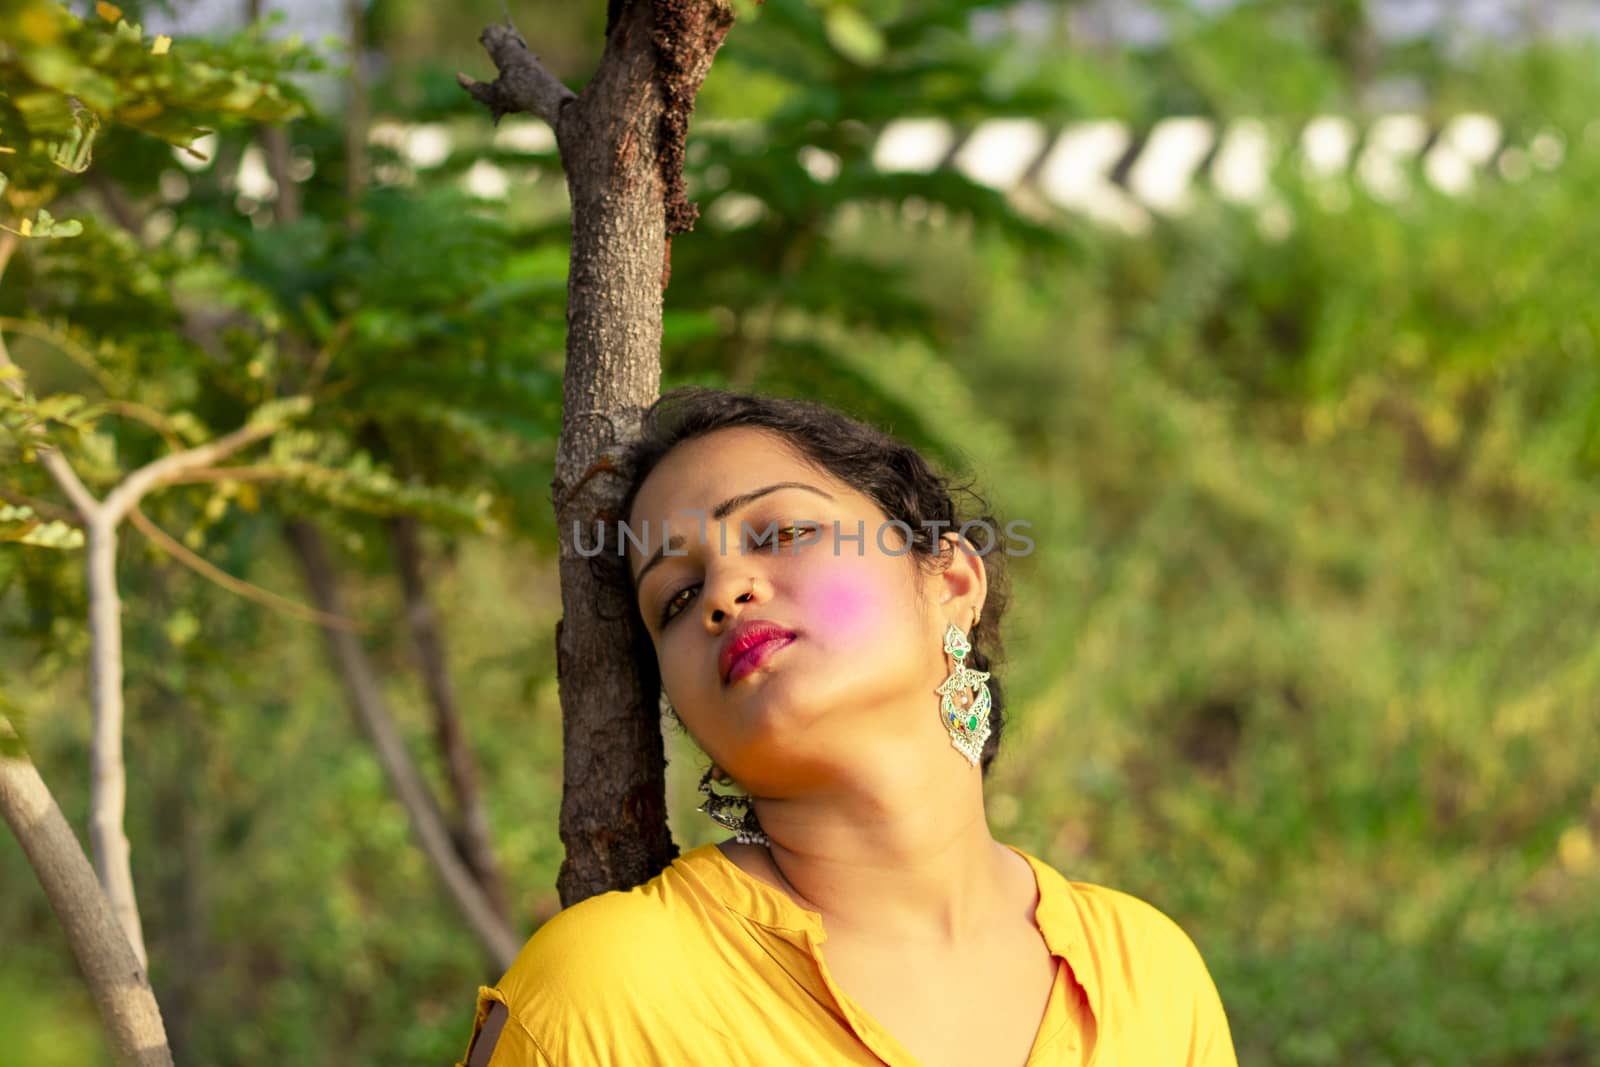 A beautiful Indian female model poses in a photo by 9500102400